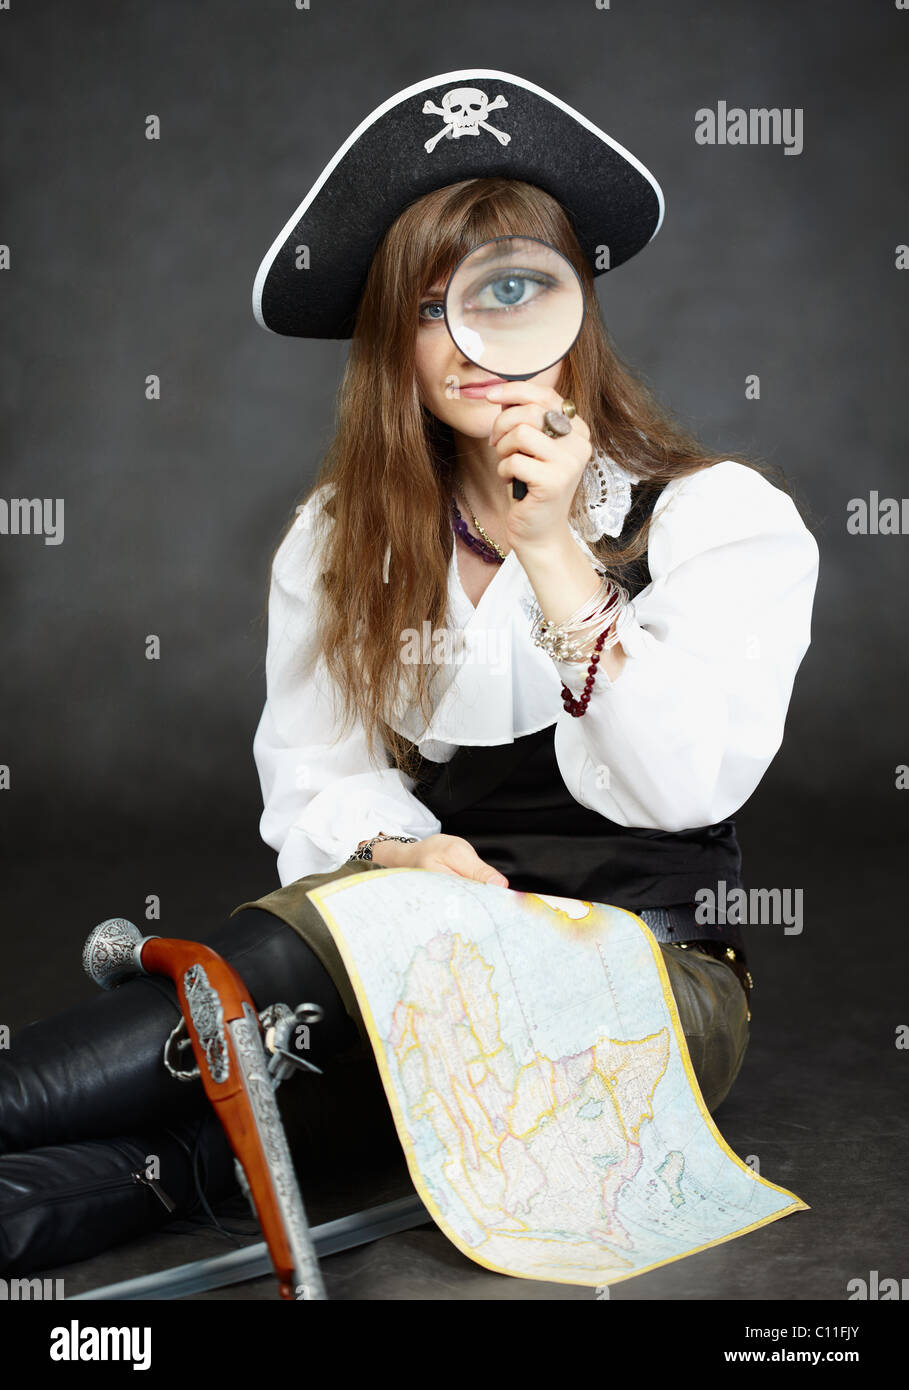 Woman pirate, and map with a magnifying glass on black background Stock Photo